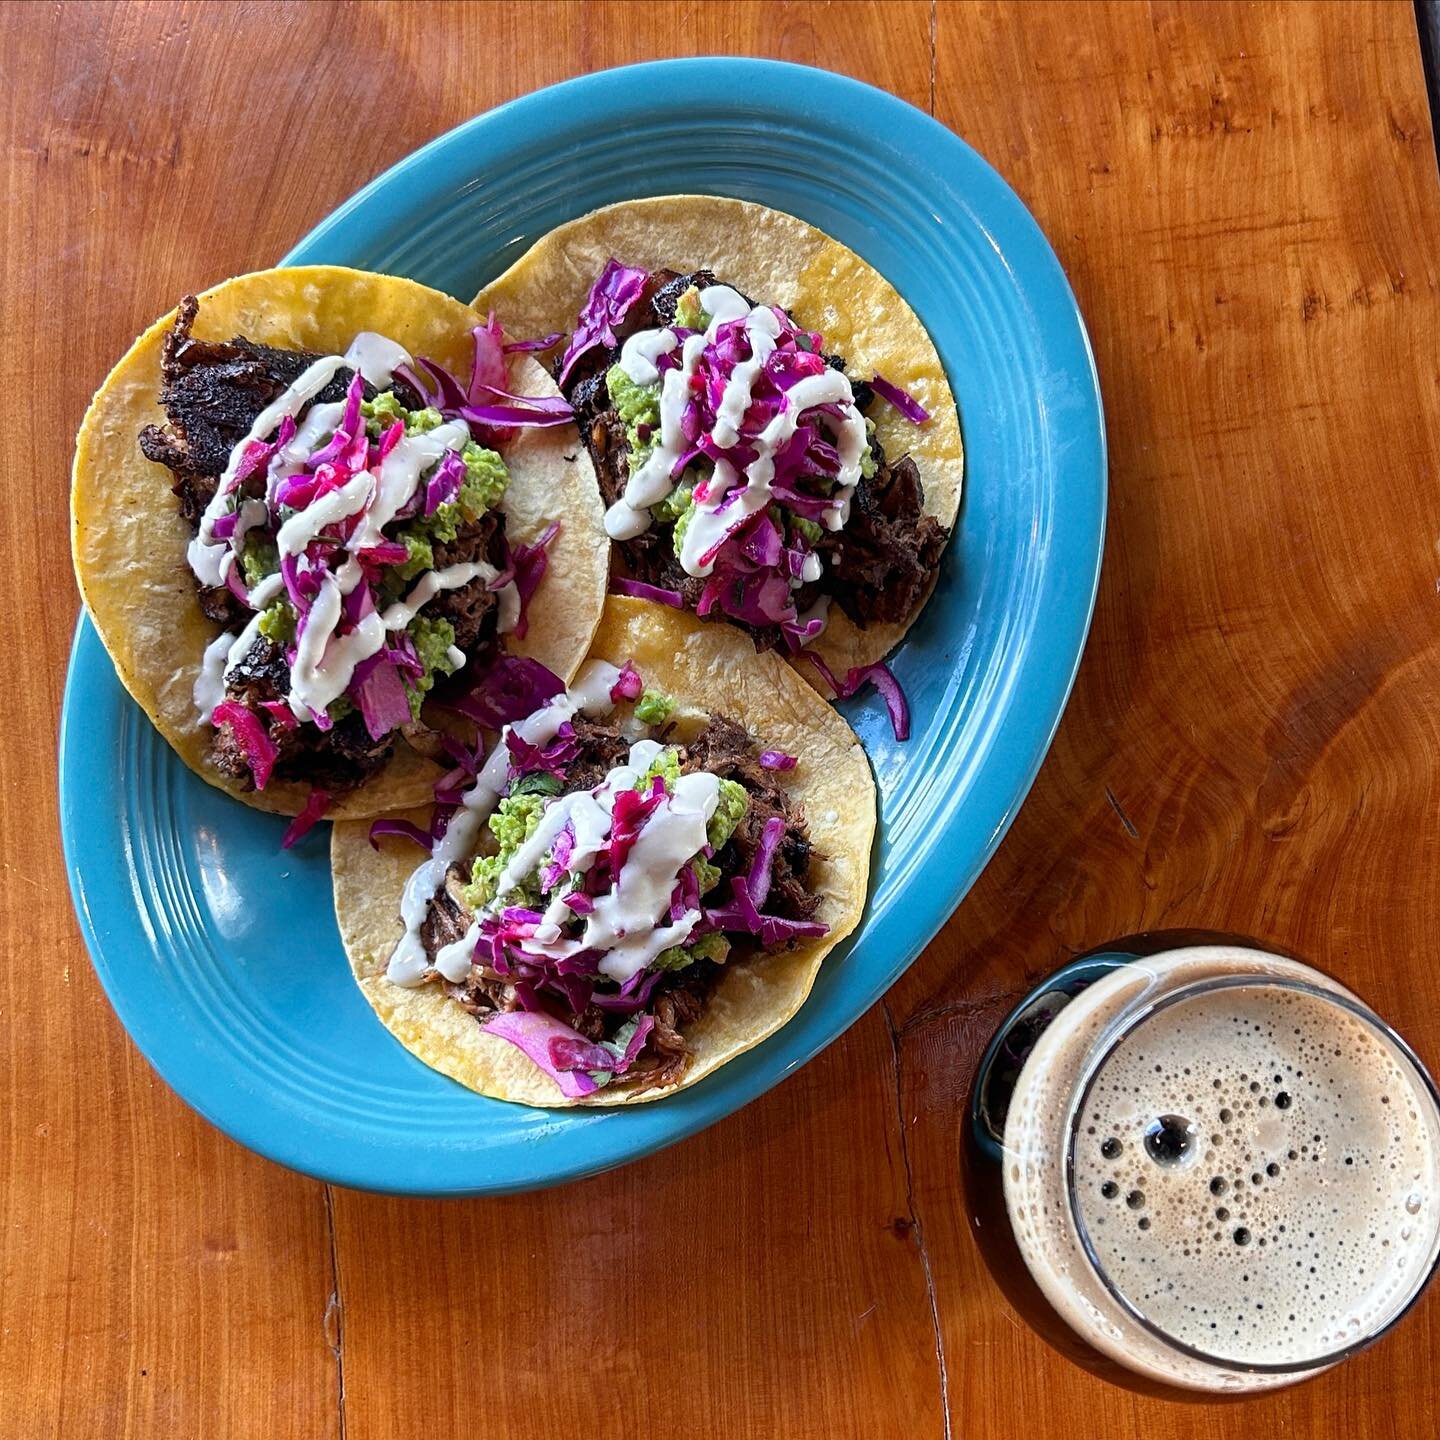 🎧 Vinyl &amp; Tacos 🌮 

It&rsquo;s Taco Tuesday! 
And @djquickkay is spinning vinyl at 6pm!

Tacos 🌮 Short rib and shiitake, green pea guacamole,  cabbage, goat cheese crema {gluten free} ~ {3} for $10

Come join us for a pint and these incredible